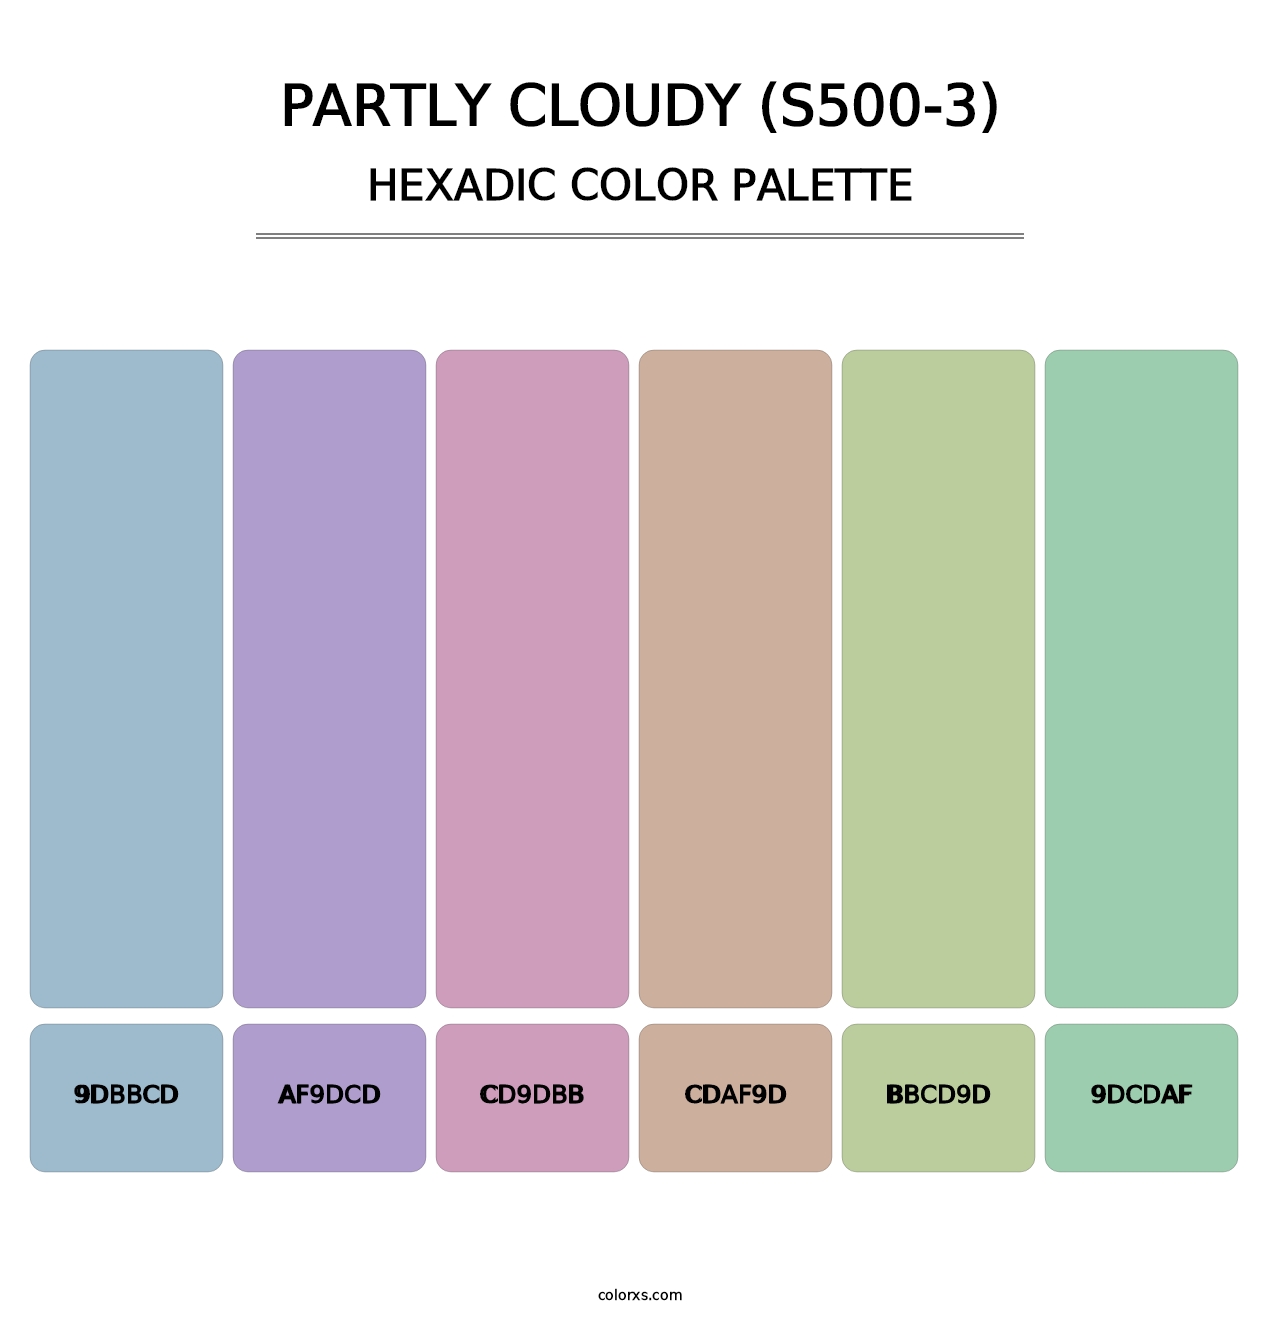 Partly Cloudy (S500-3) - Hexadic Color Palette